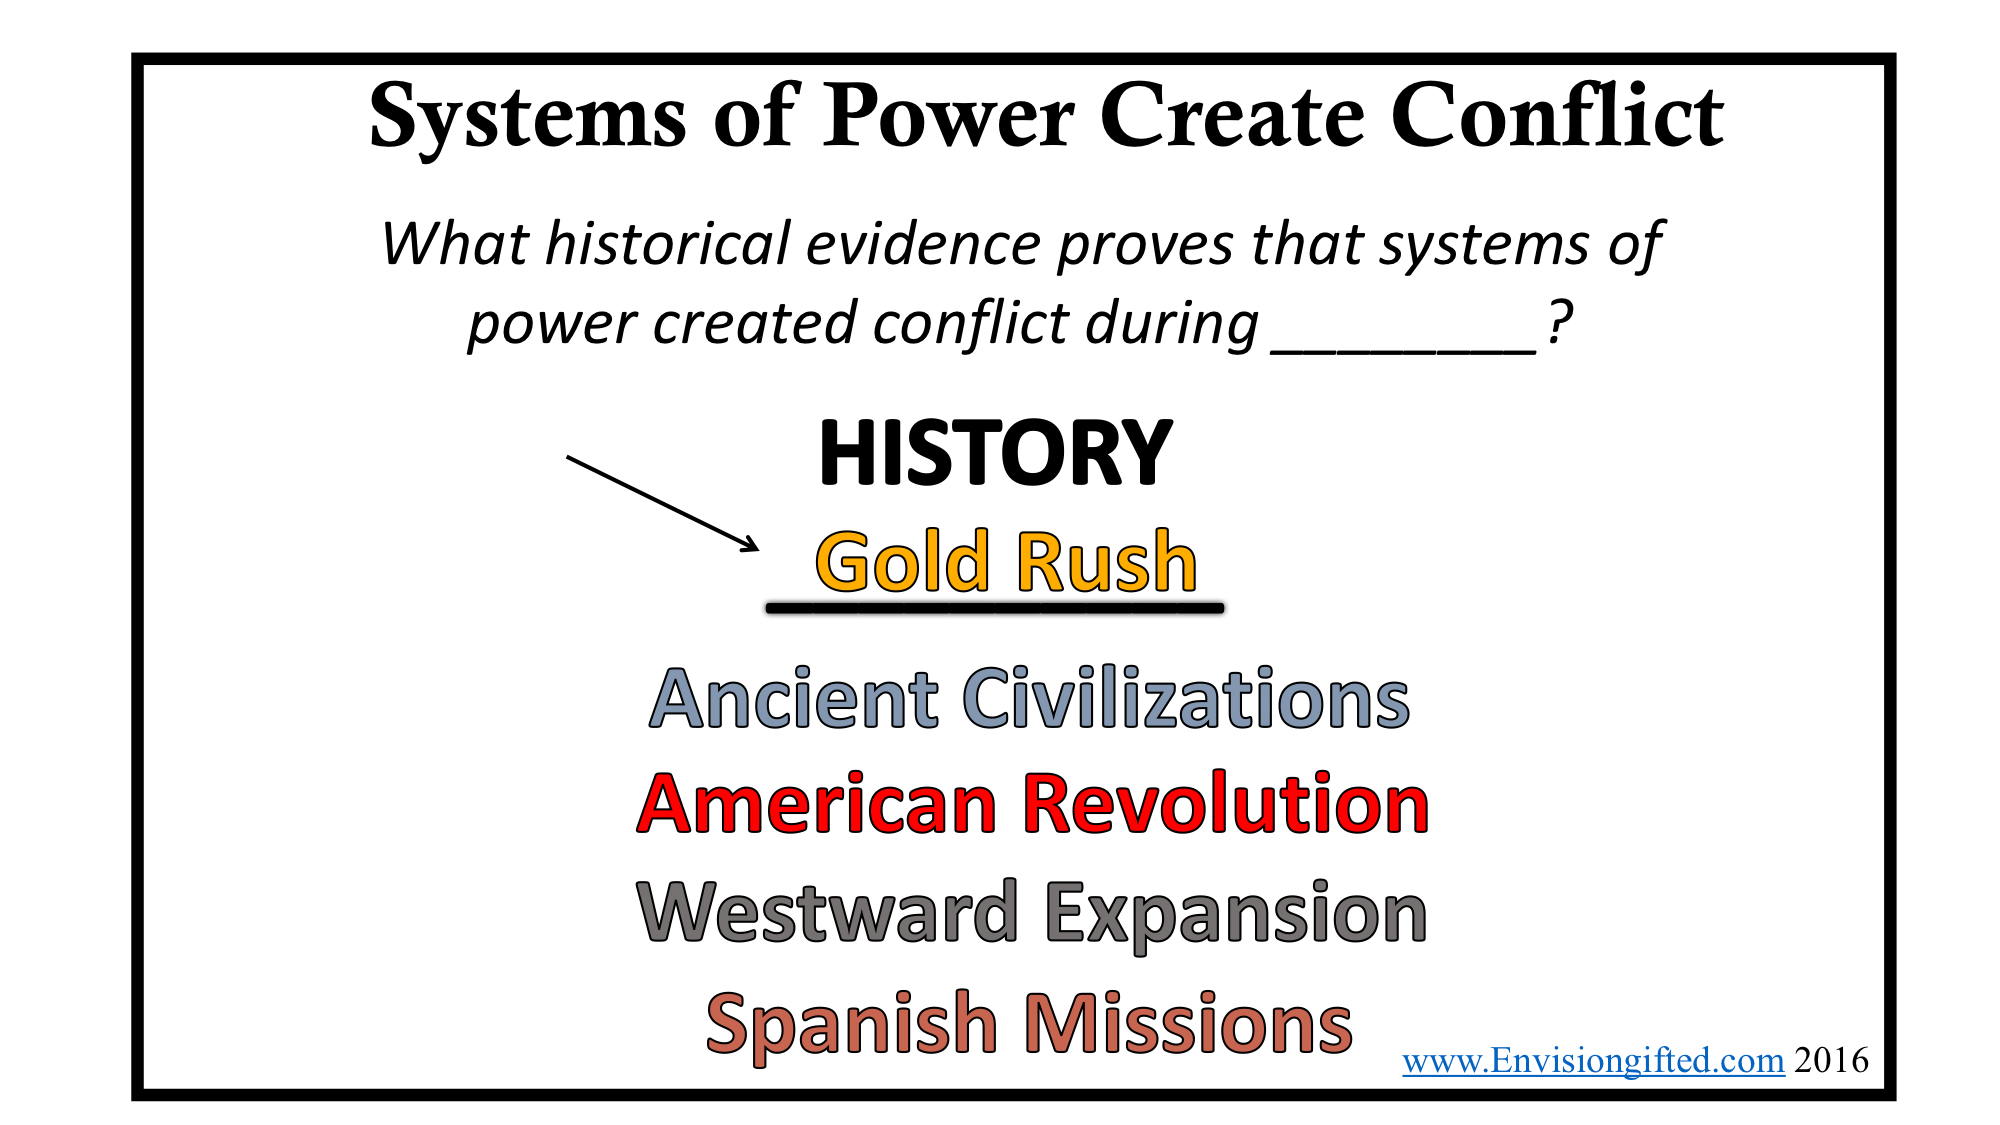 Envision Gifted. Systems-of-power-history